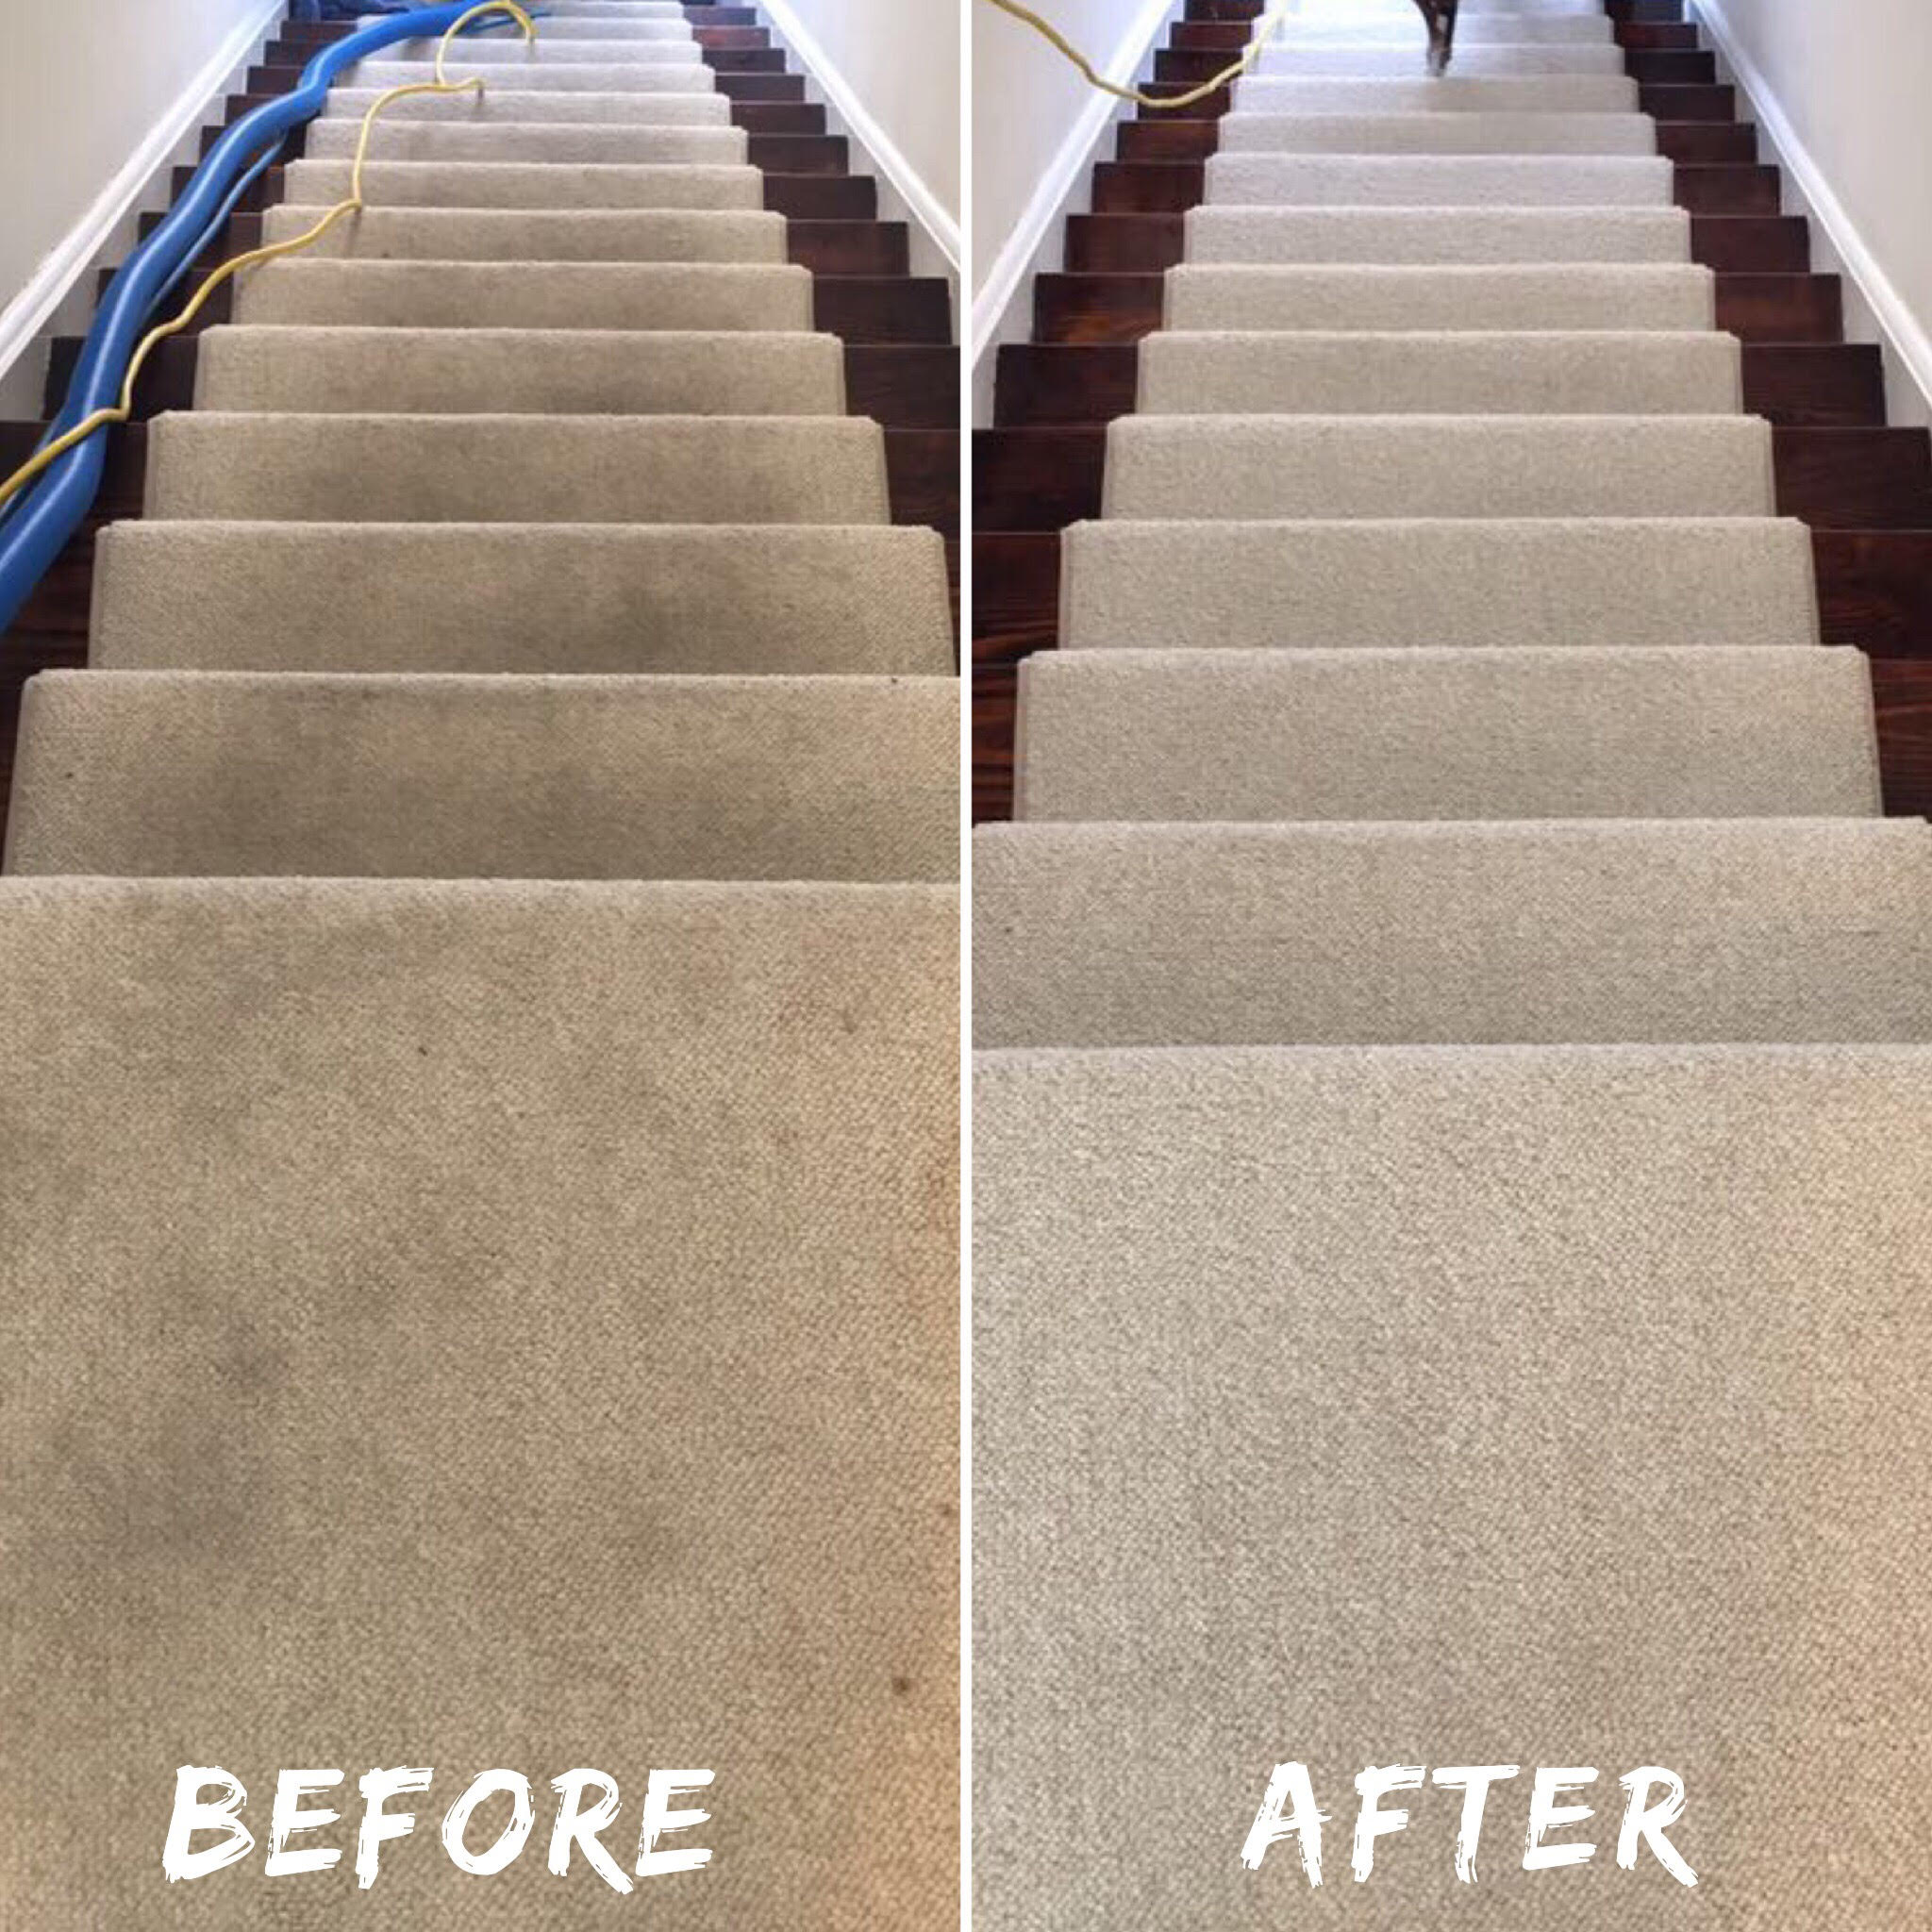 Staircase Cleaning, Stain Removal, Carpet Cleaning, Area Rug Cleaning